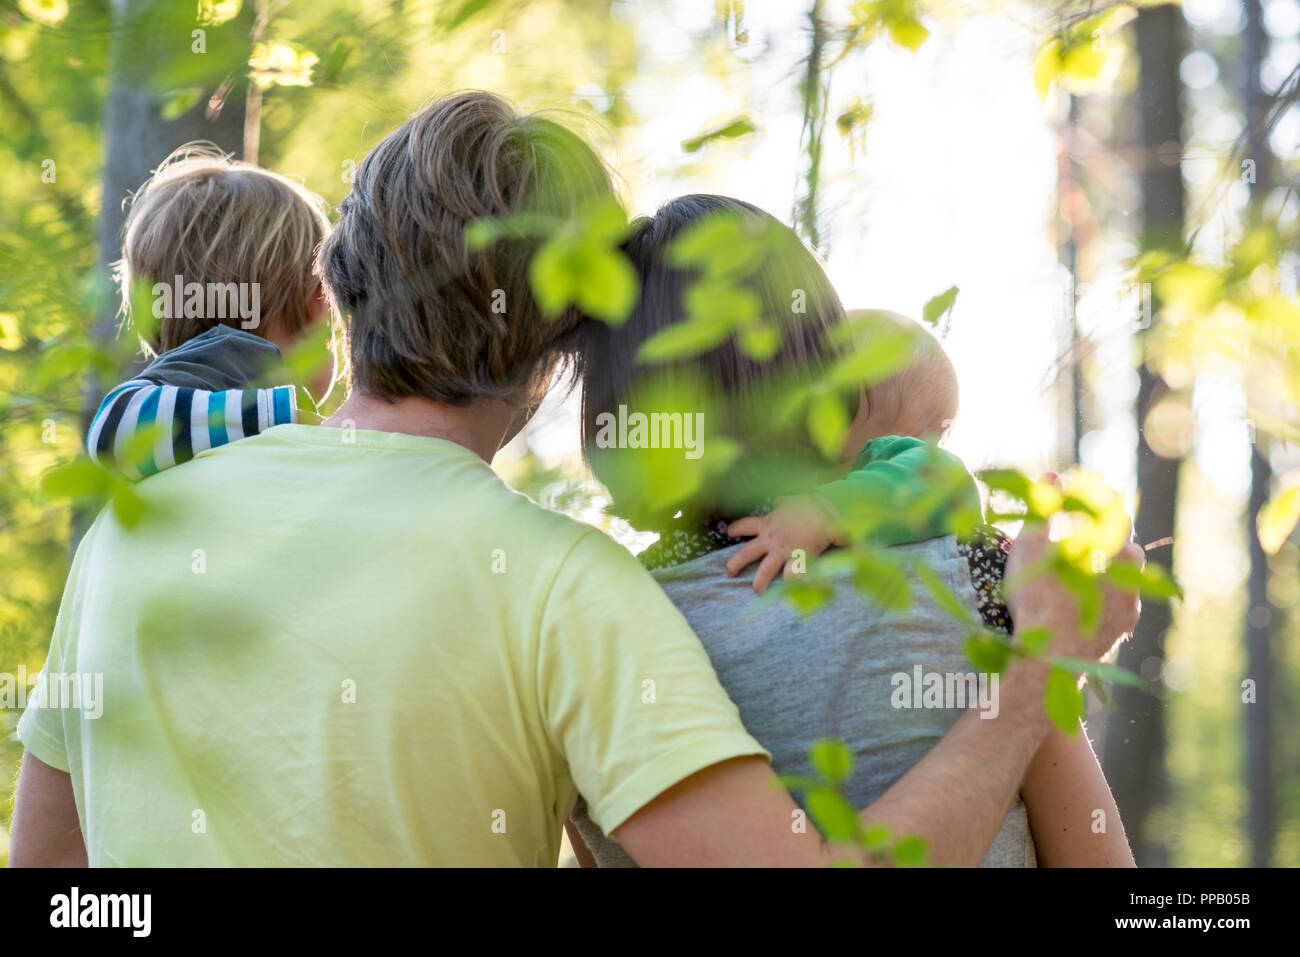 Young family enjoying a beautiful sunny day outdoors in a green forest, each of the parents carrying one child in their arms. Stock Photo